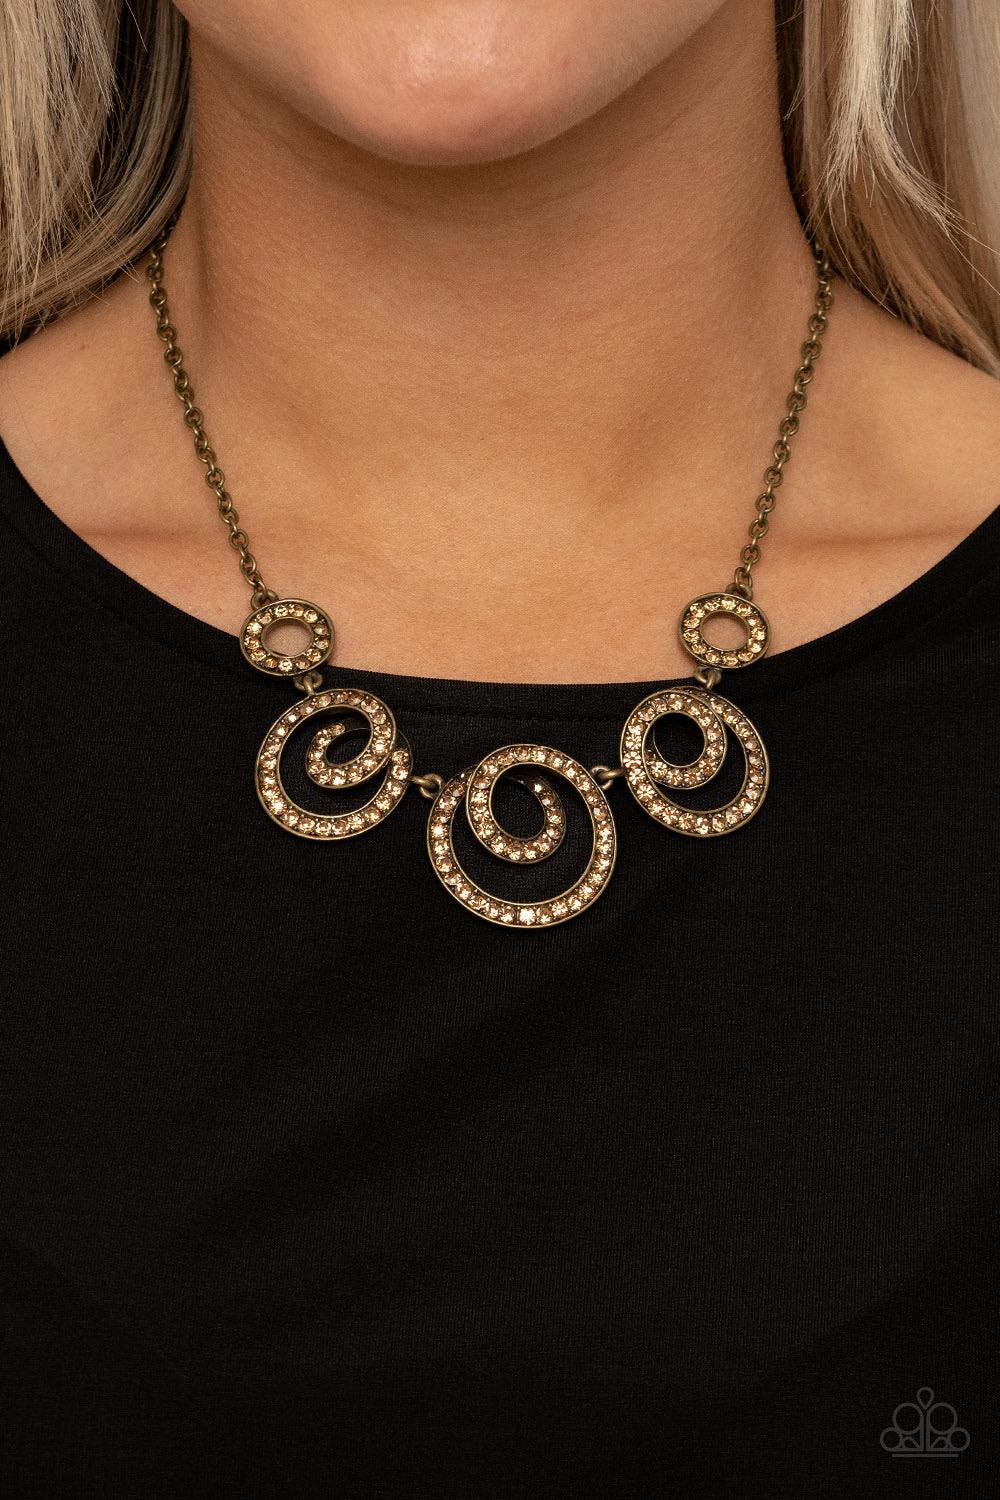 Paparazzi Accessories Total Head-Turner - Brass Encrusted in glassy topaz rhinestones, swirling brass frames delicately connect below the collar for a statement-making finish. Features an adjustable clasp closure. Sold as one individual necklace. Includes